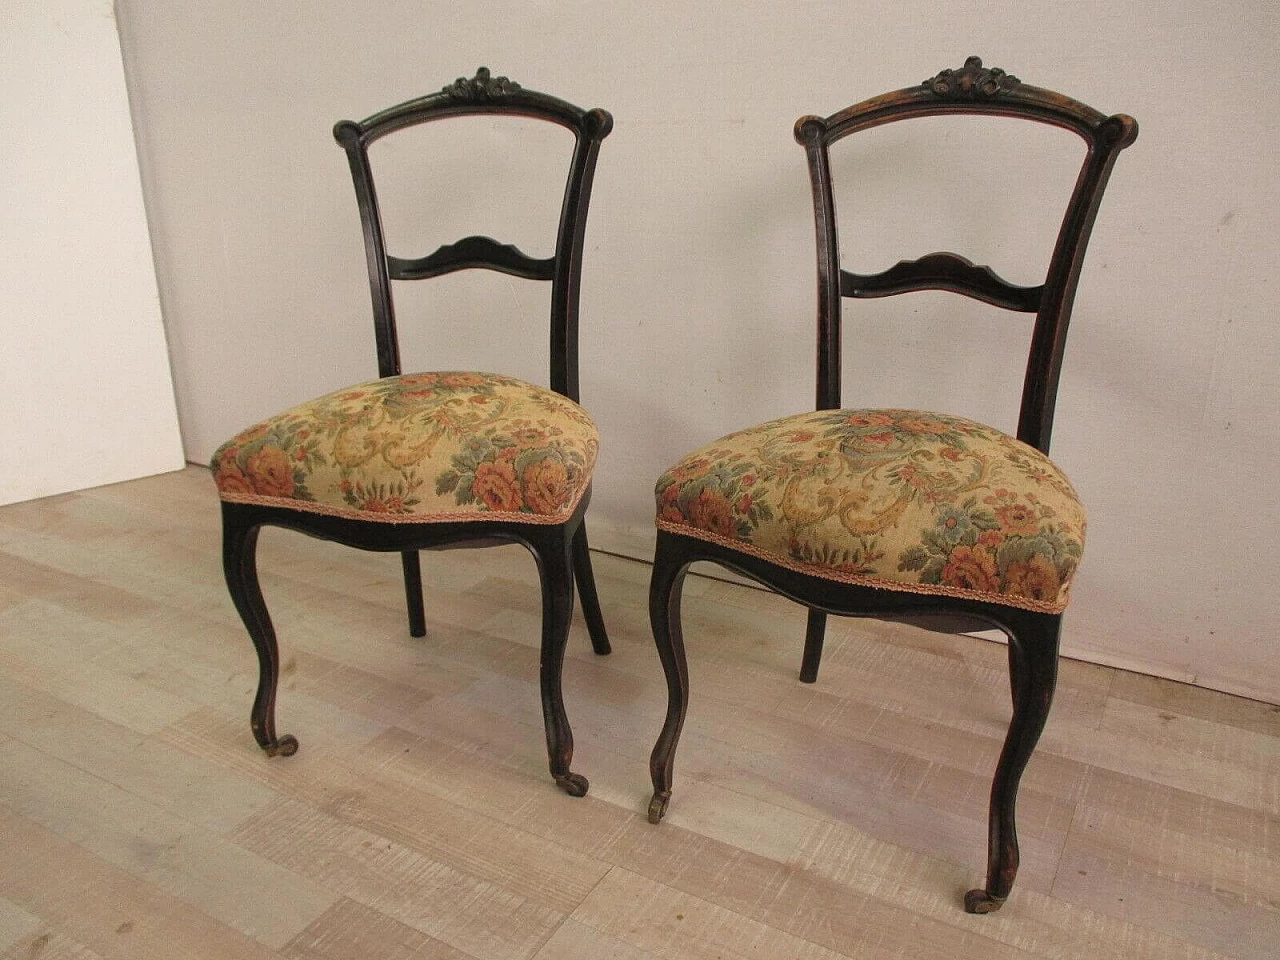 Pair of Umbertine chairs with casters in ebonised solid walnut and Gobelin fabric, 19th century 3